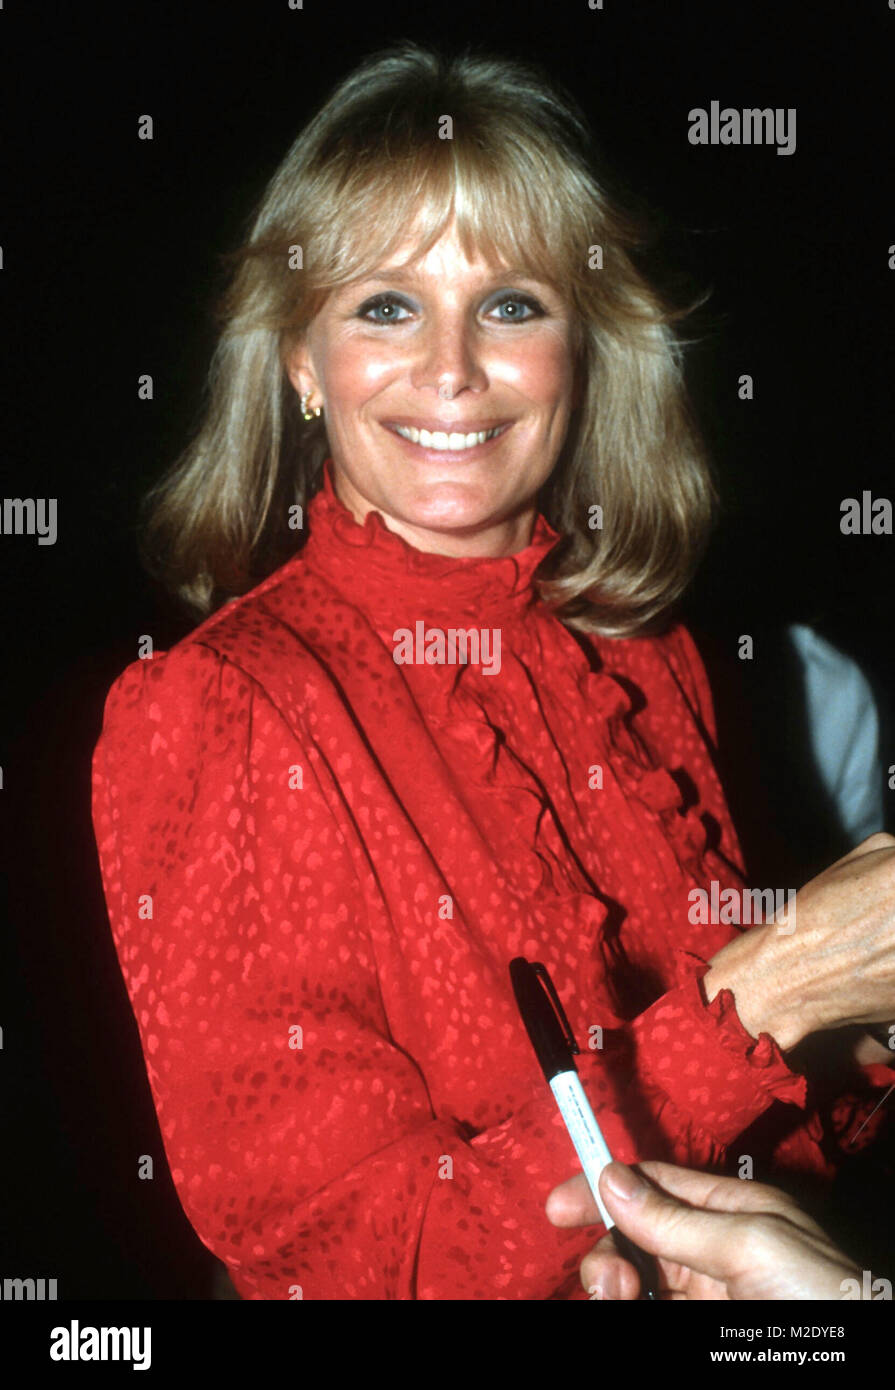 Pictures of linda evans